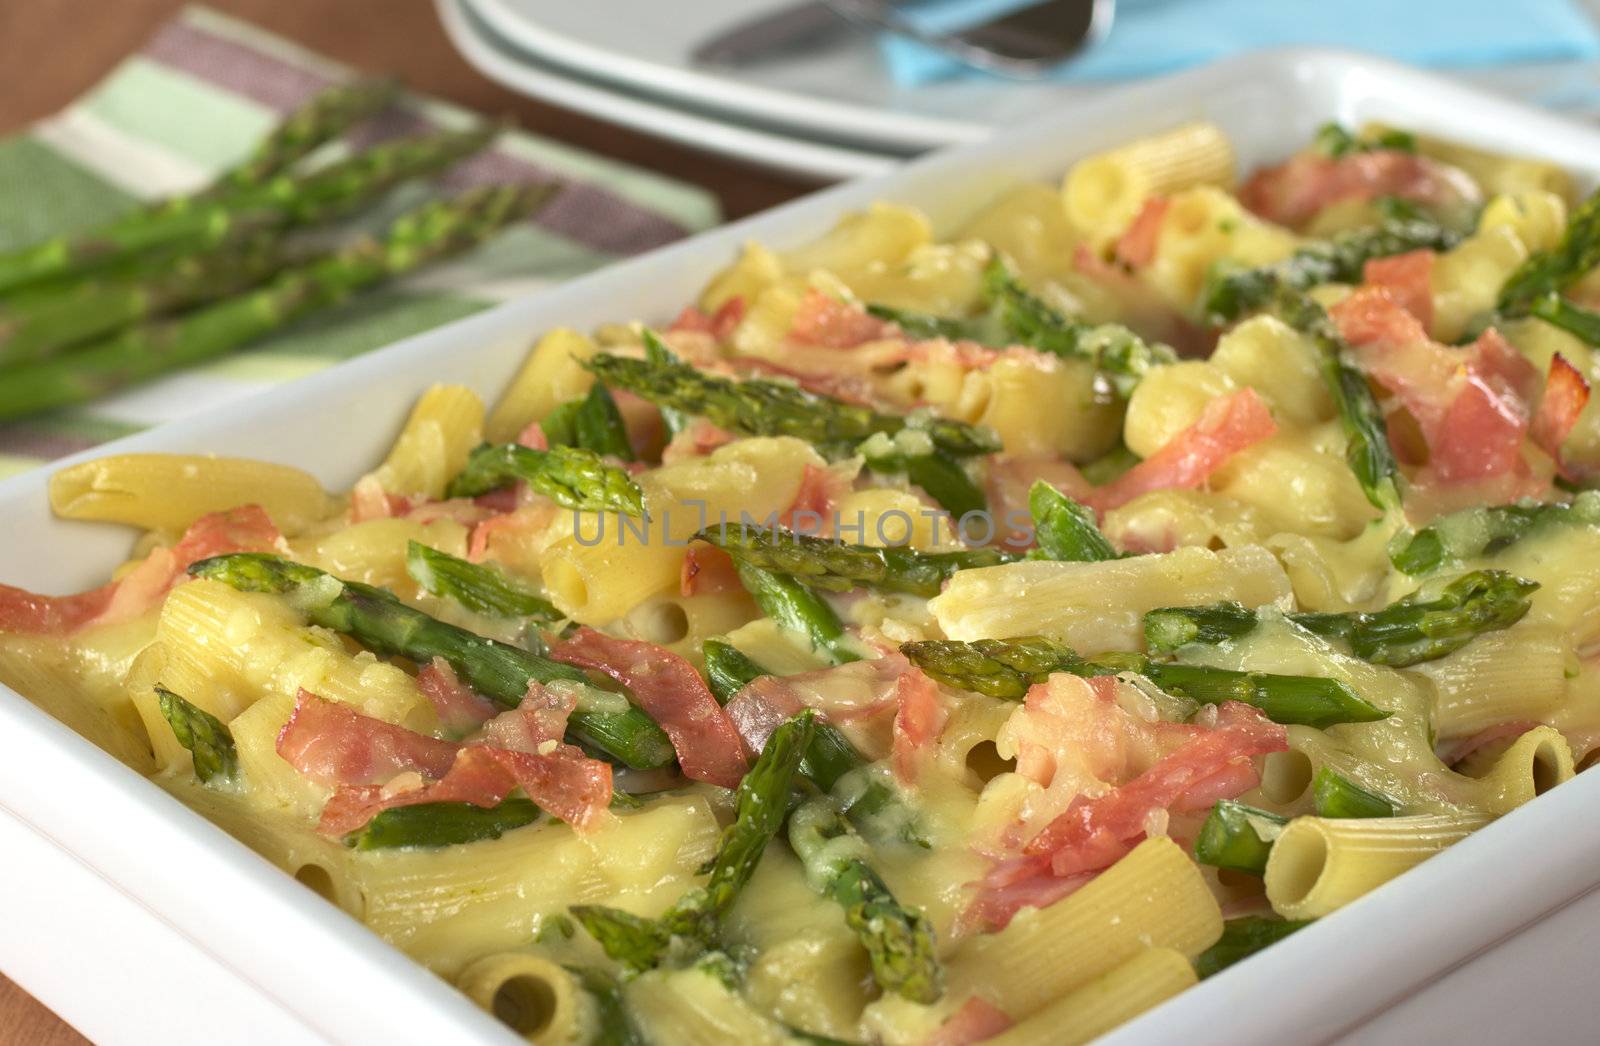 Casserole of green asparagus, ham and macaroni with raw green asparagus and plates in the back (Selective Focus, Focus one third into the dish)